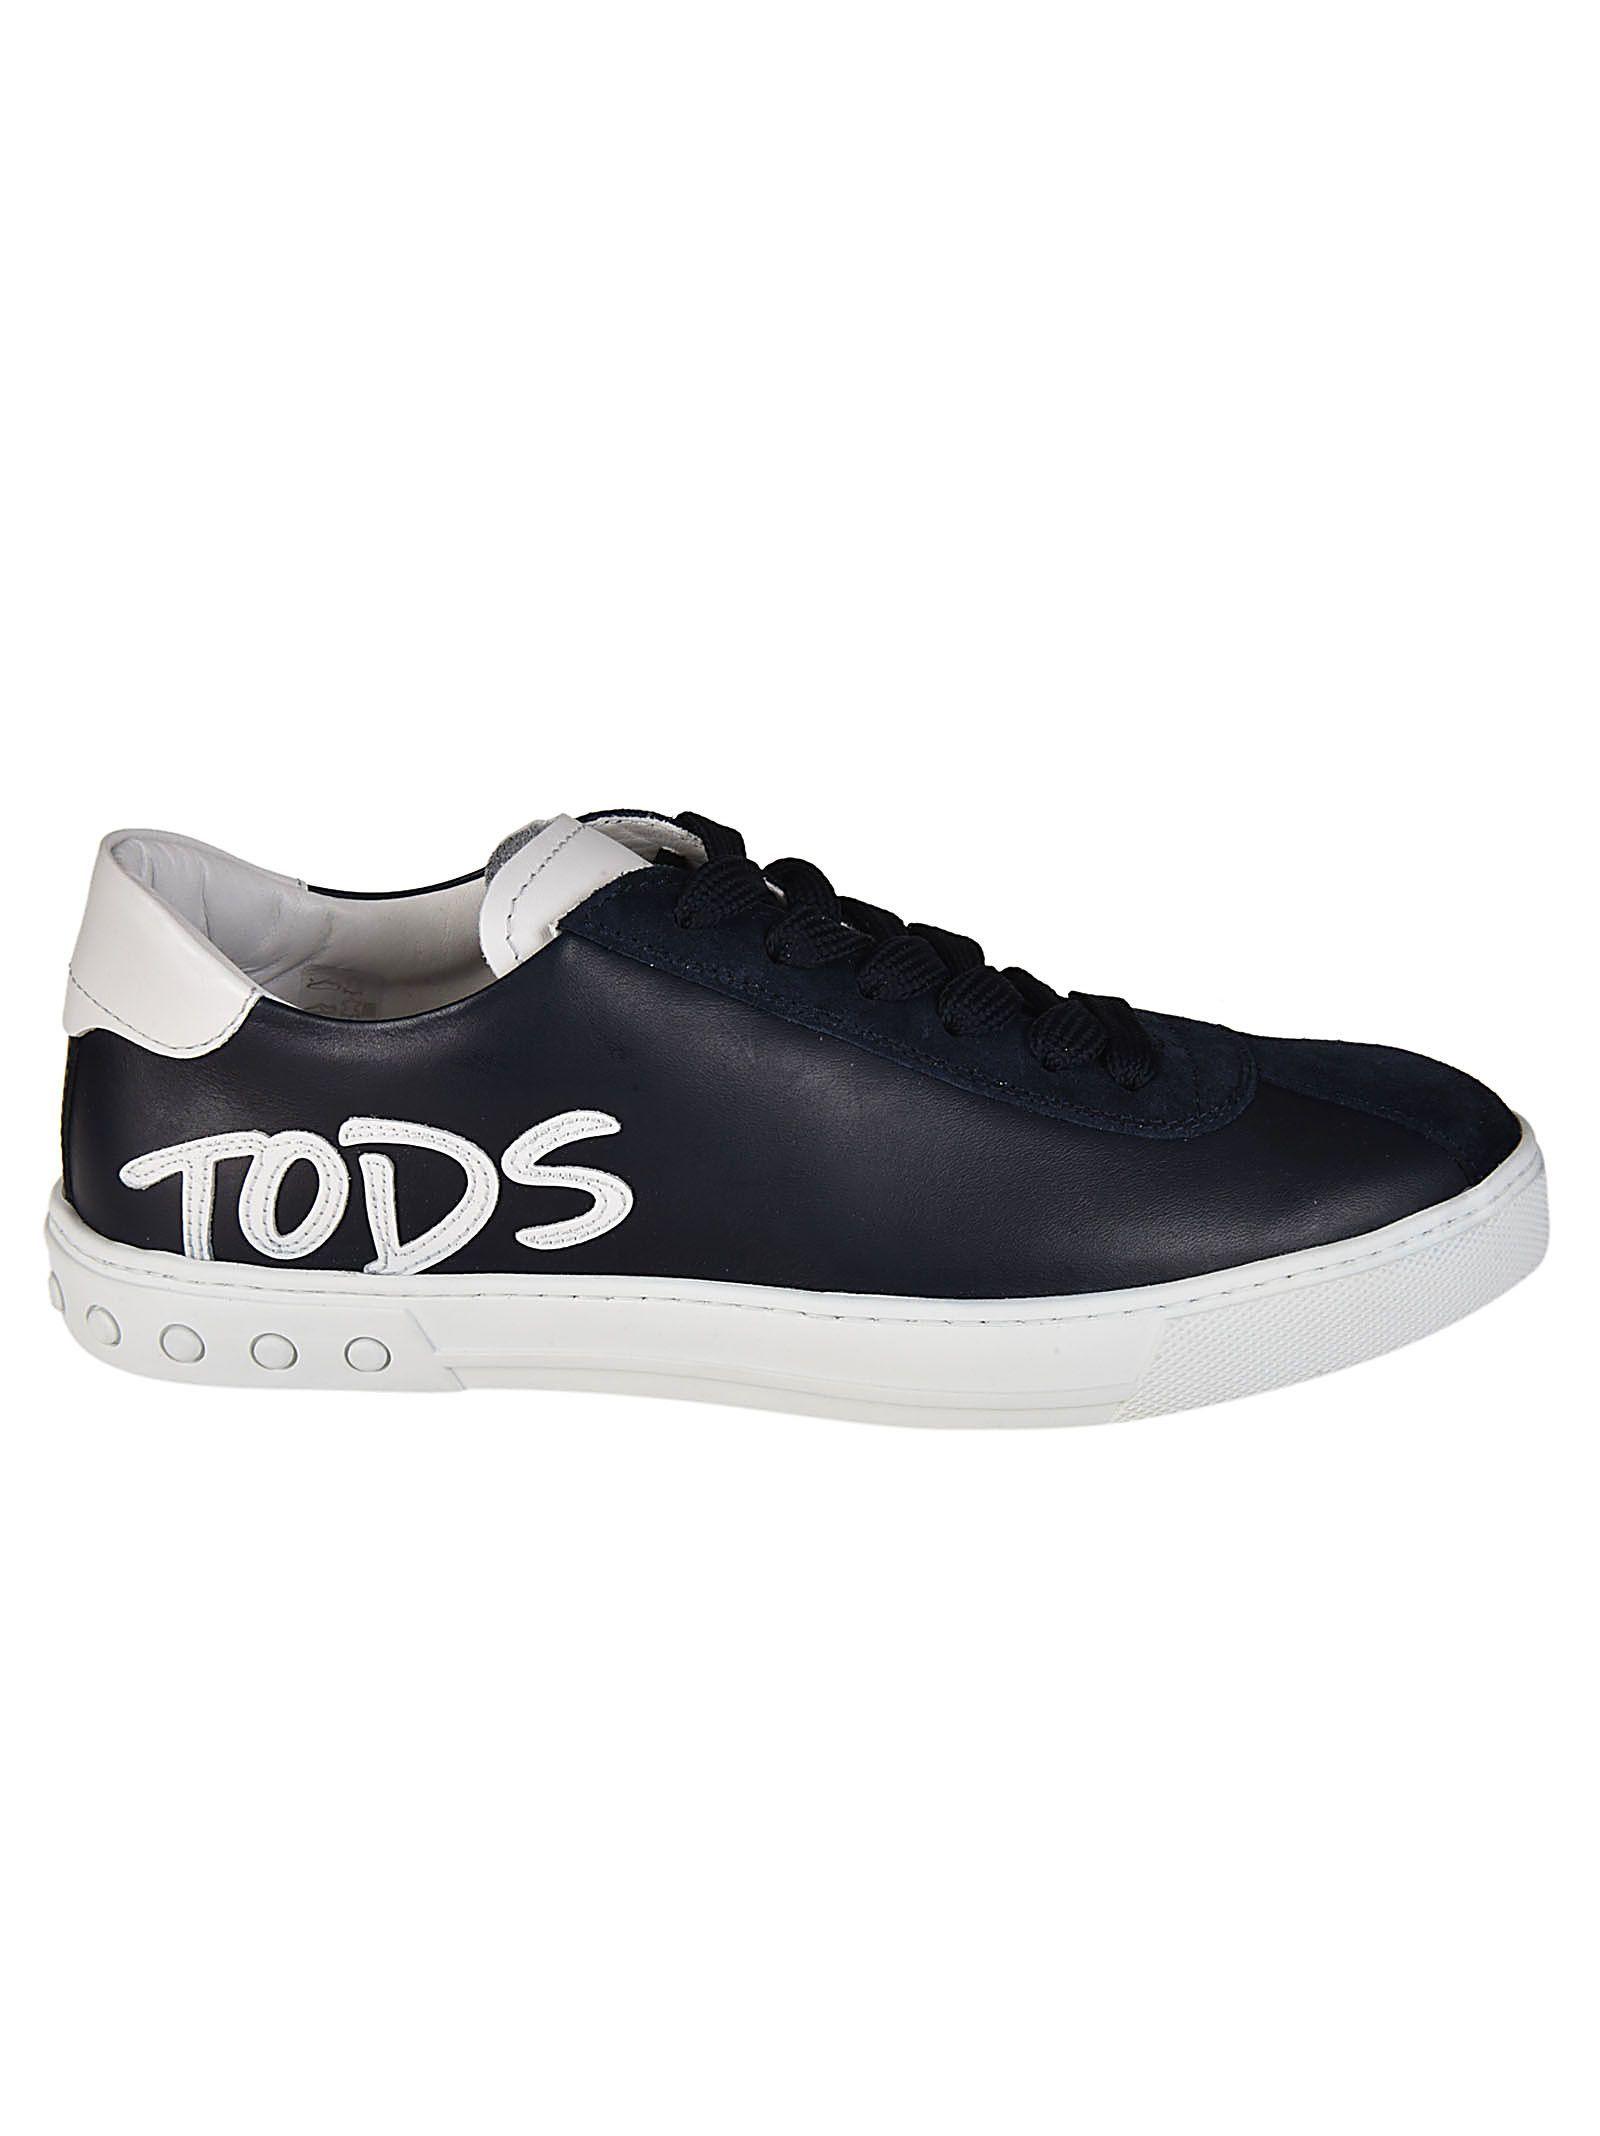 Tod's Logo - TOD'S LOGO APPLIQUE LACE UP SNEAKERS. #tods #shoes #. Tod'S Men